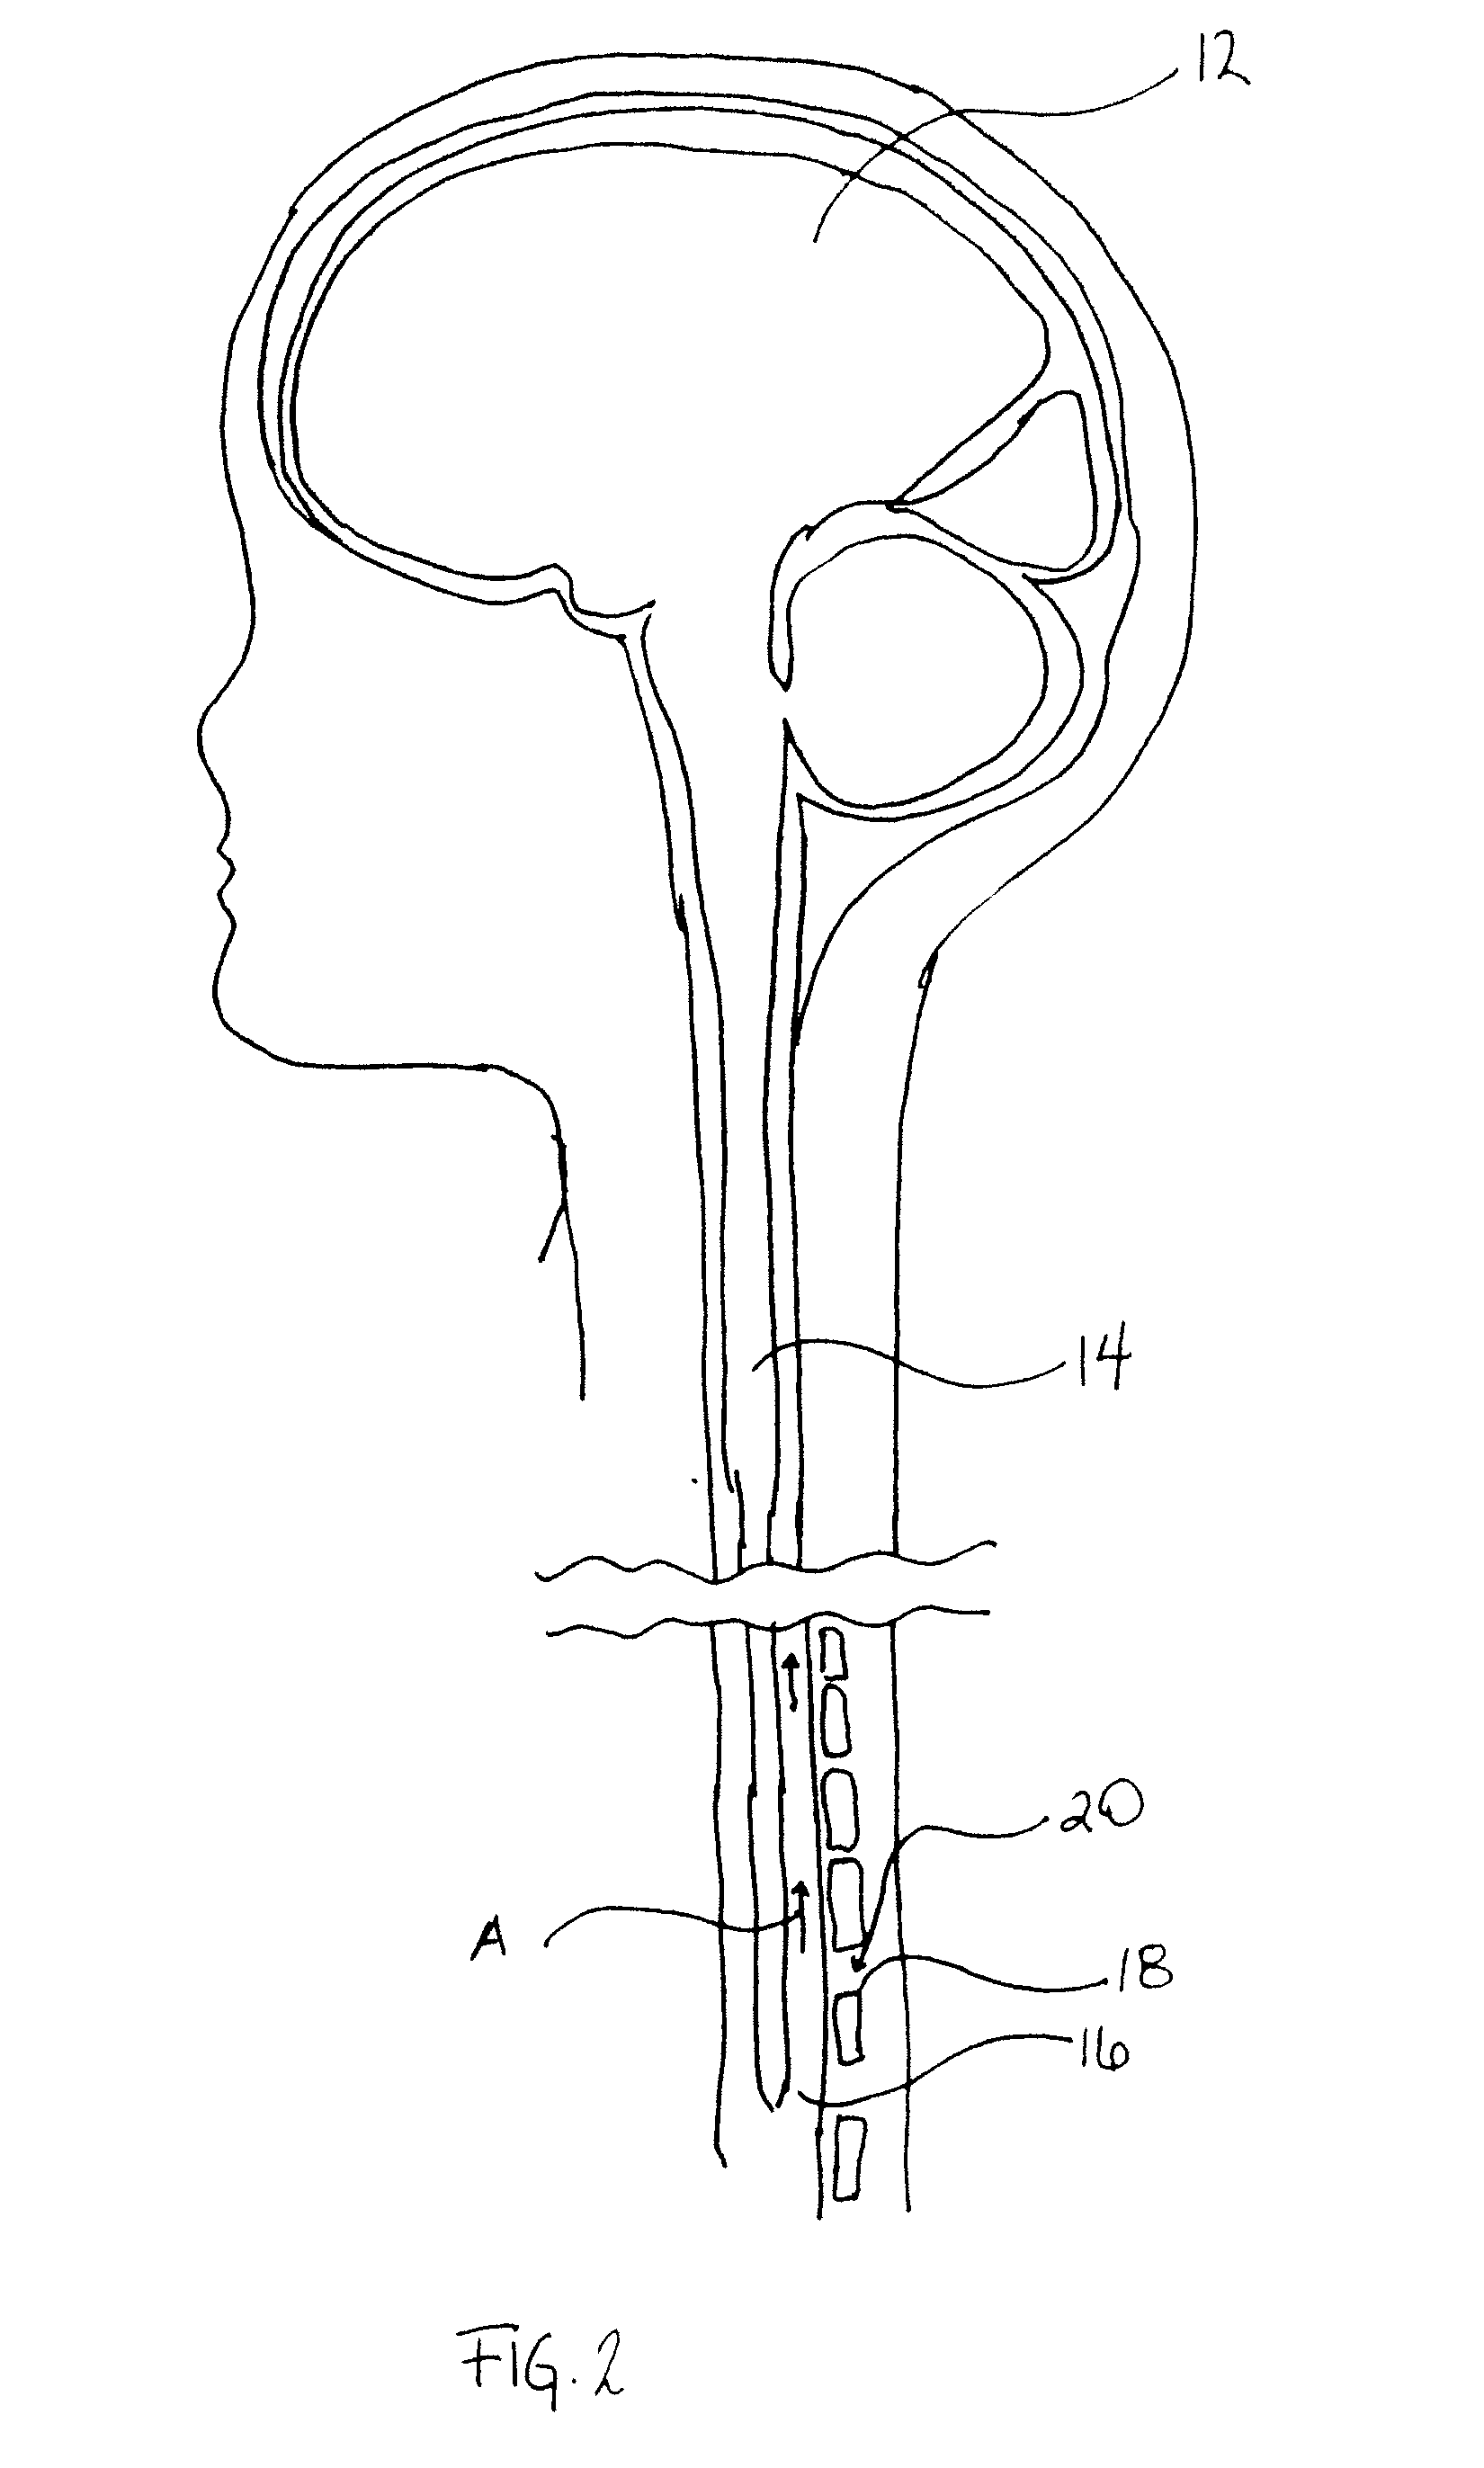 Bidirectional cerebral spinal fluid infusion catheter with cooling mechanism and method of use